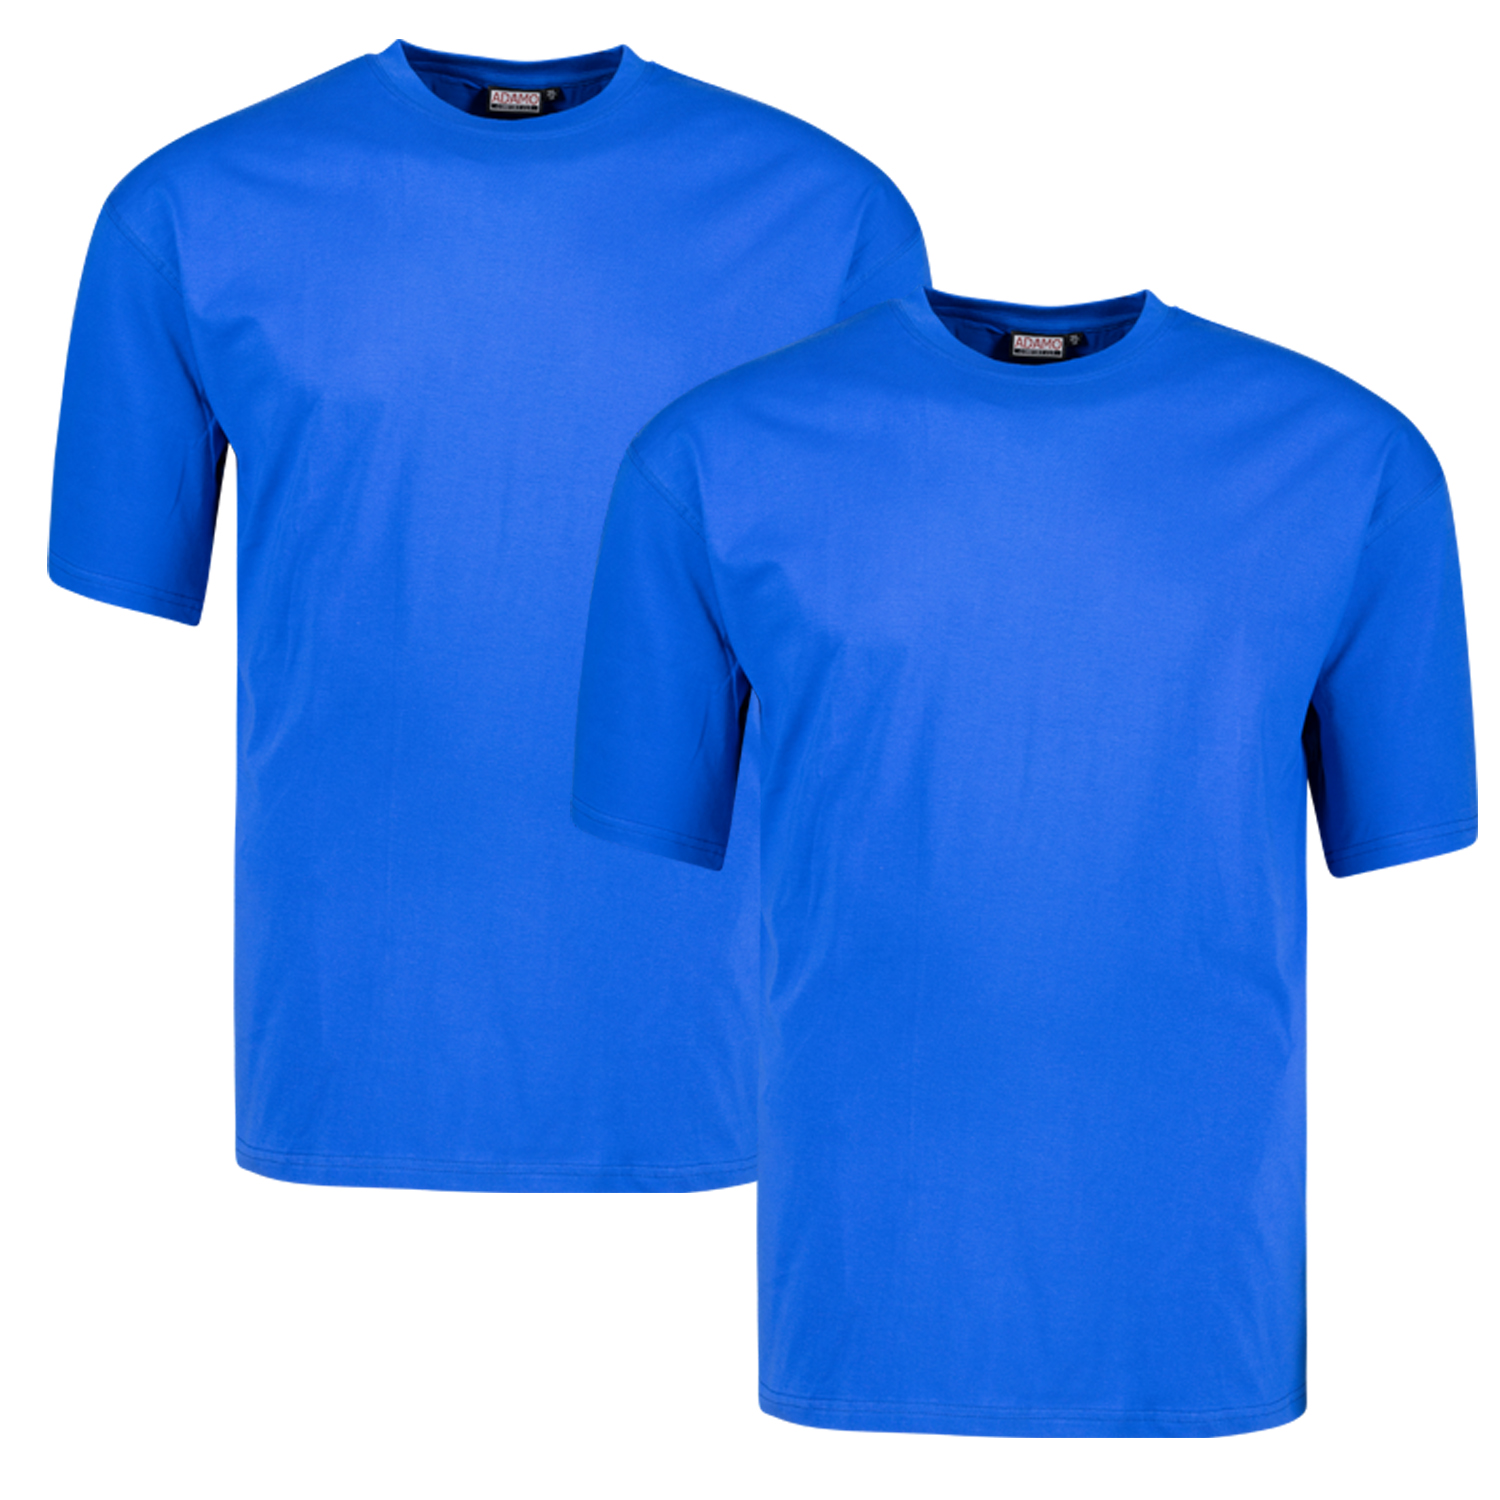 ADAMO round neck T-shirt COMFORT FIT MARLON 2-pack in various colors and sizes up to 16XL